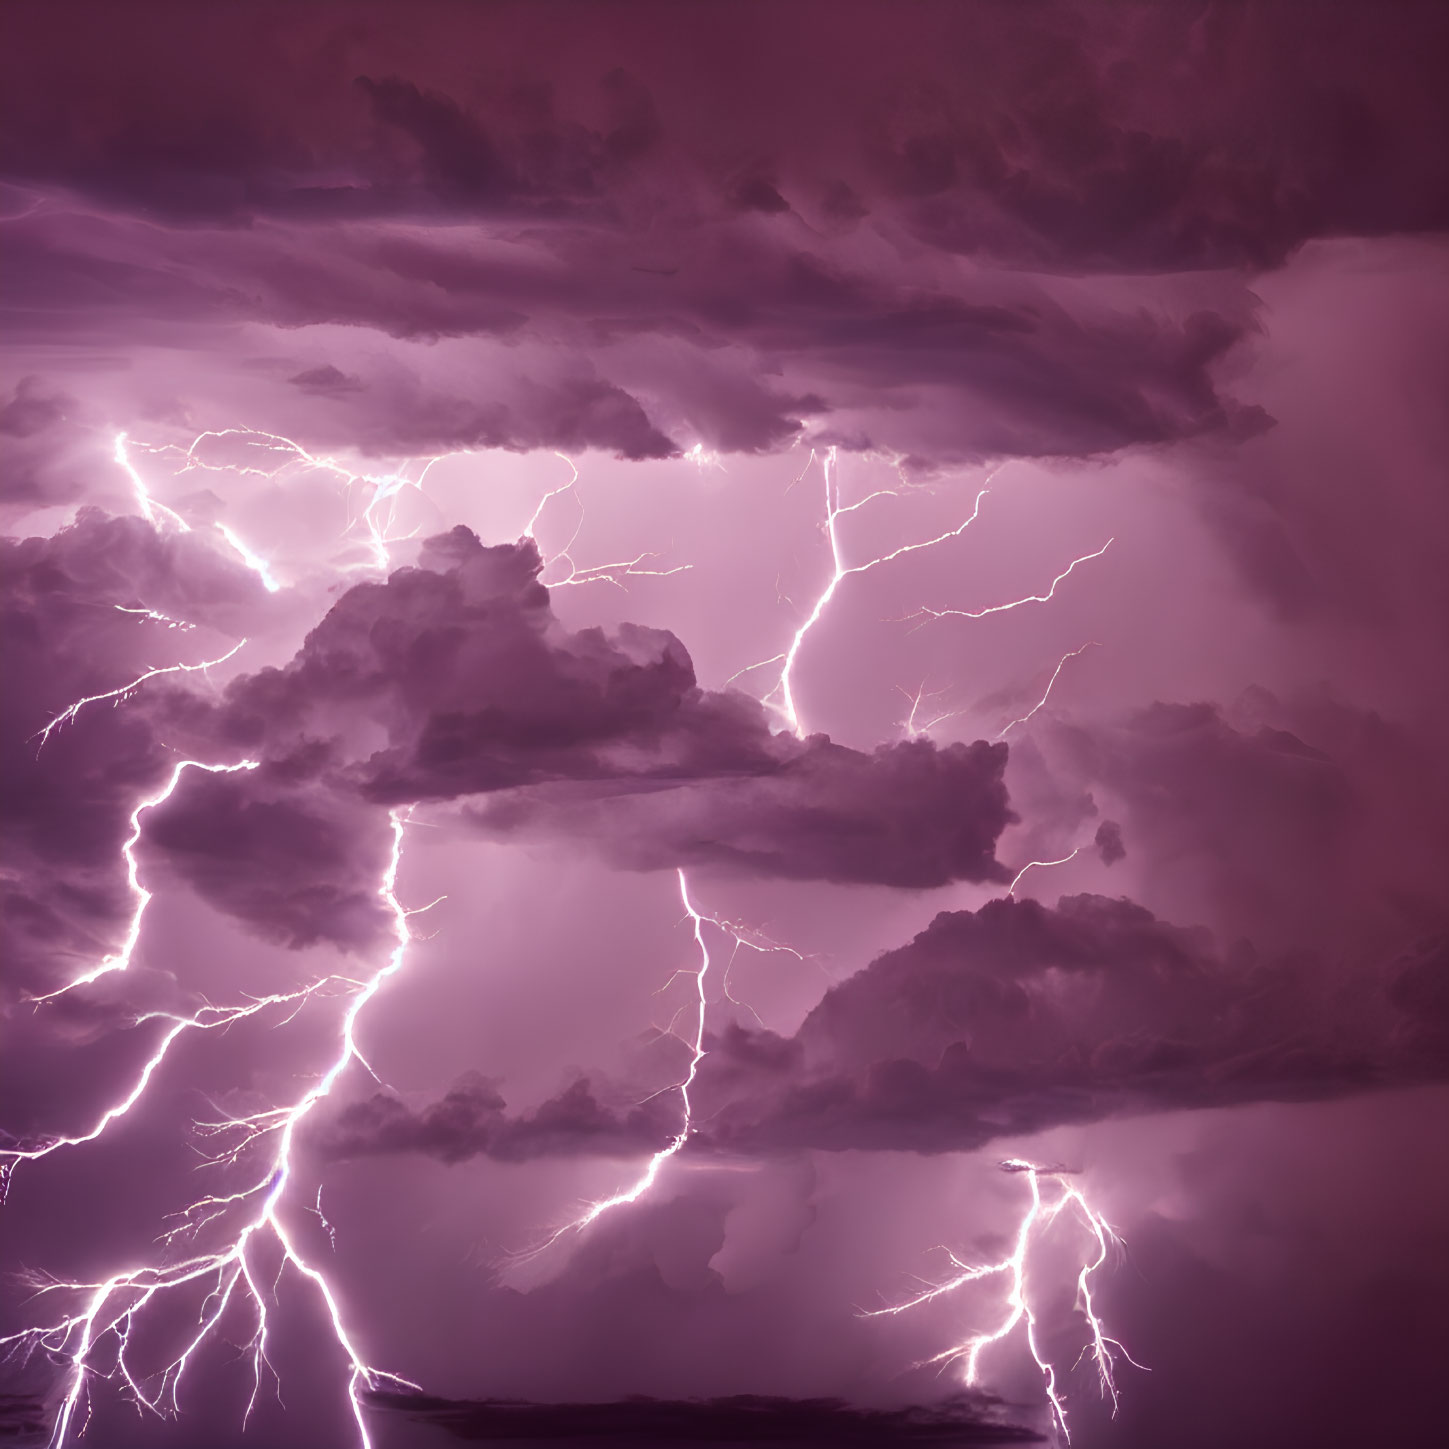 Dramatic purple sky with lightning strikes in dark clouds